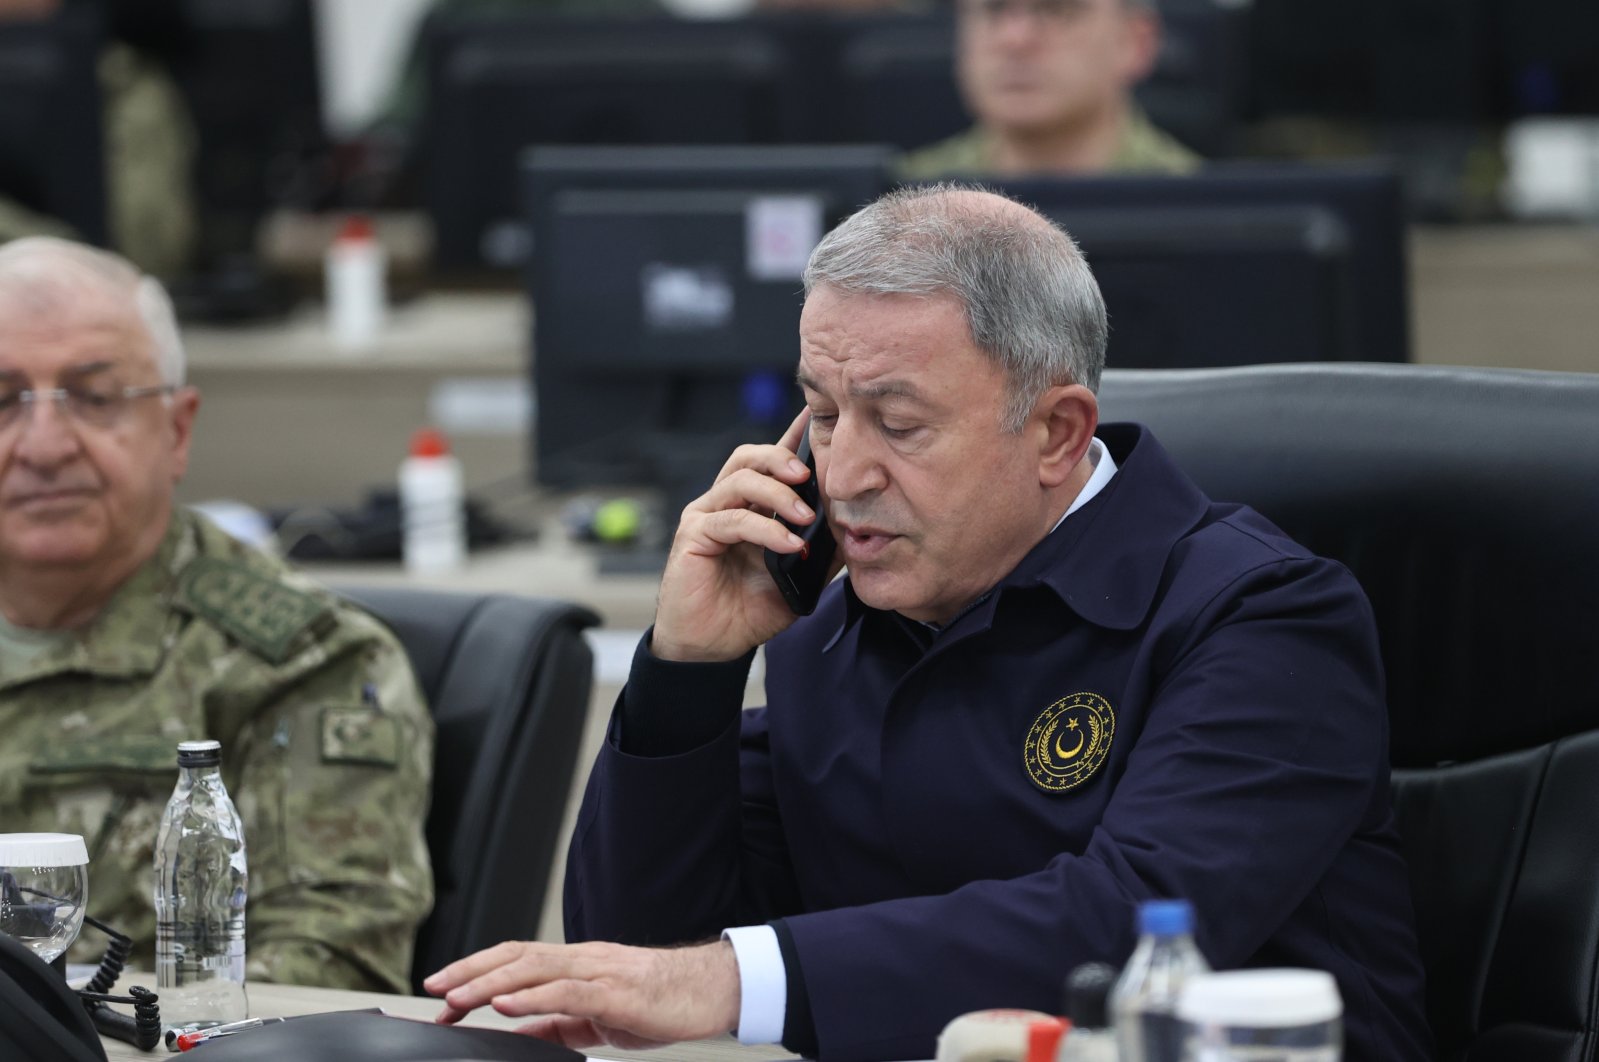 Defense Minister Hulusi Akar during his visit to the Land Forces Command Advanced Joint Operations Center in Şanlıurfa, Turkey, May 2, 2022. (AA Photo)